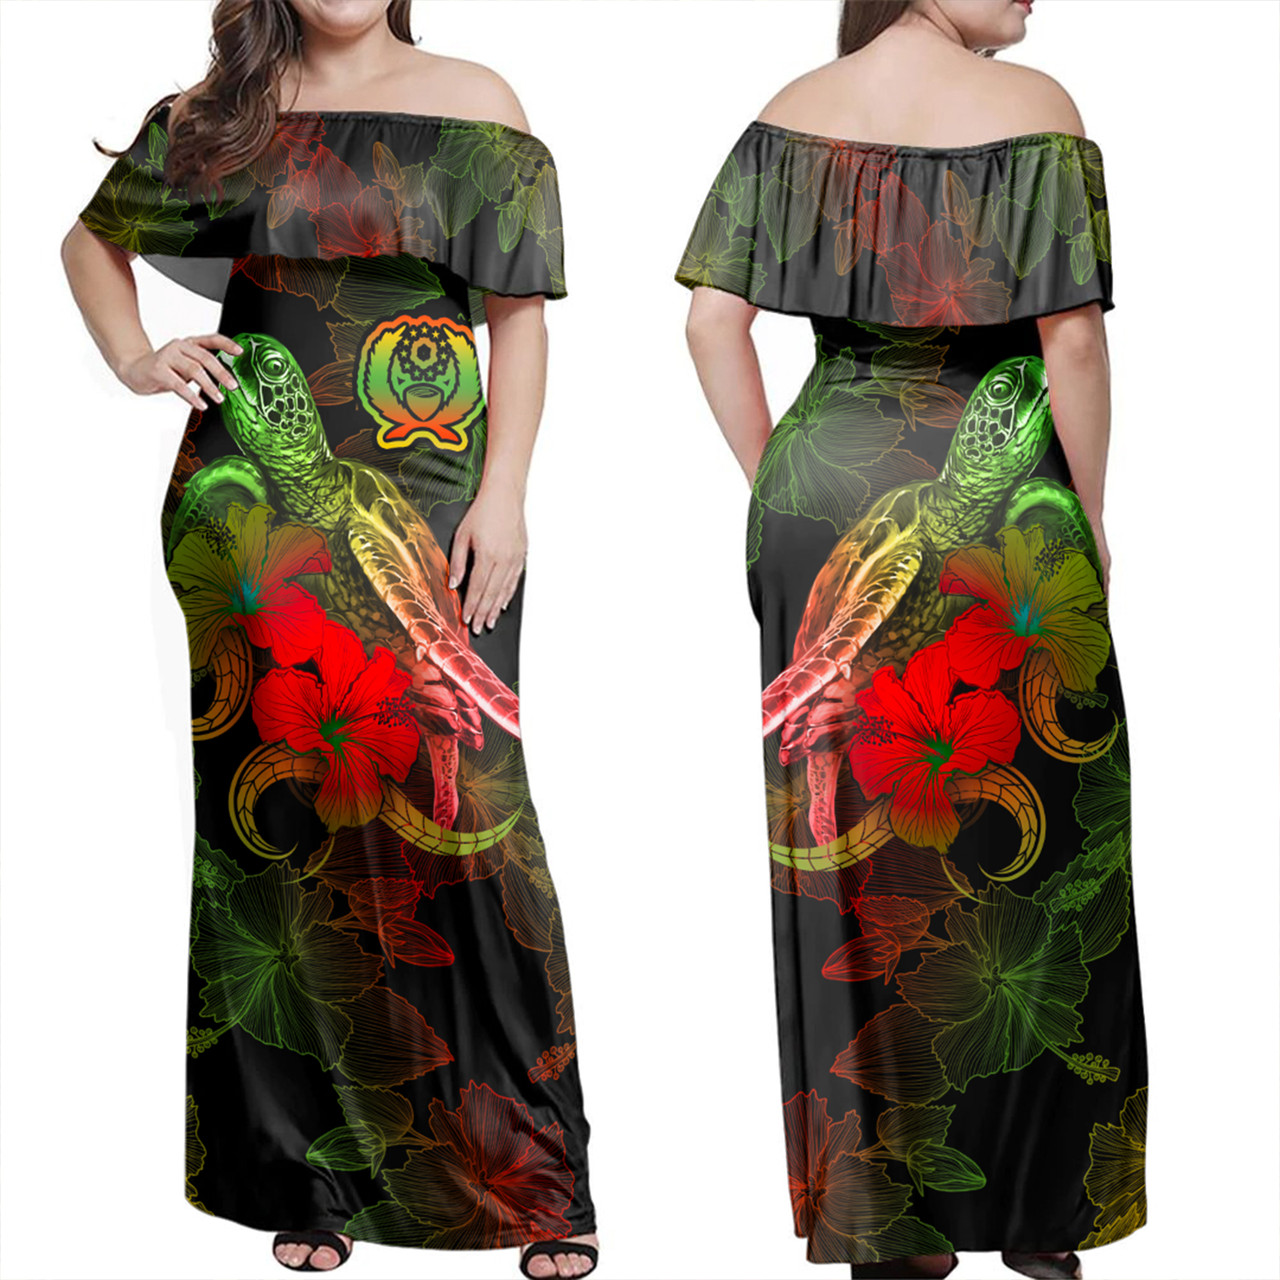 Pohnpei State Woman Off Shoulder Long Dress - Sea Turtle With Blooming Hibiscus Flowers Reggae